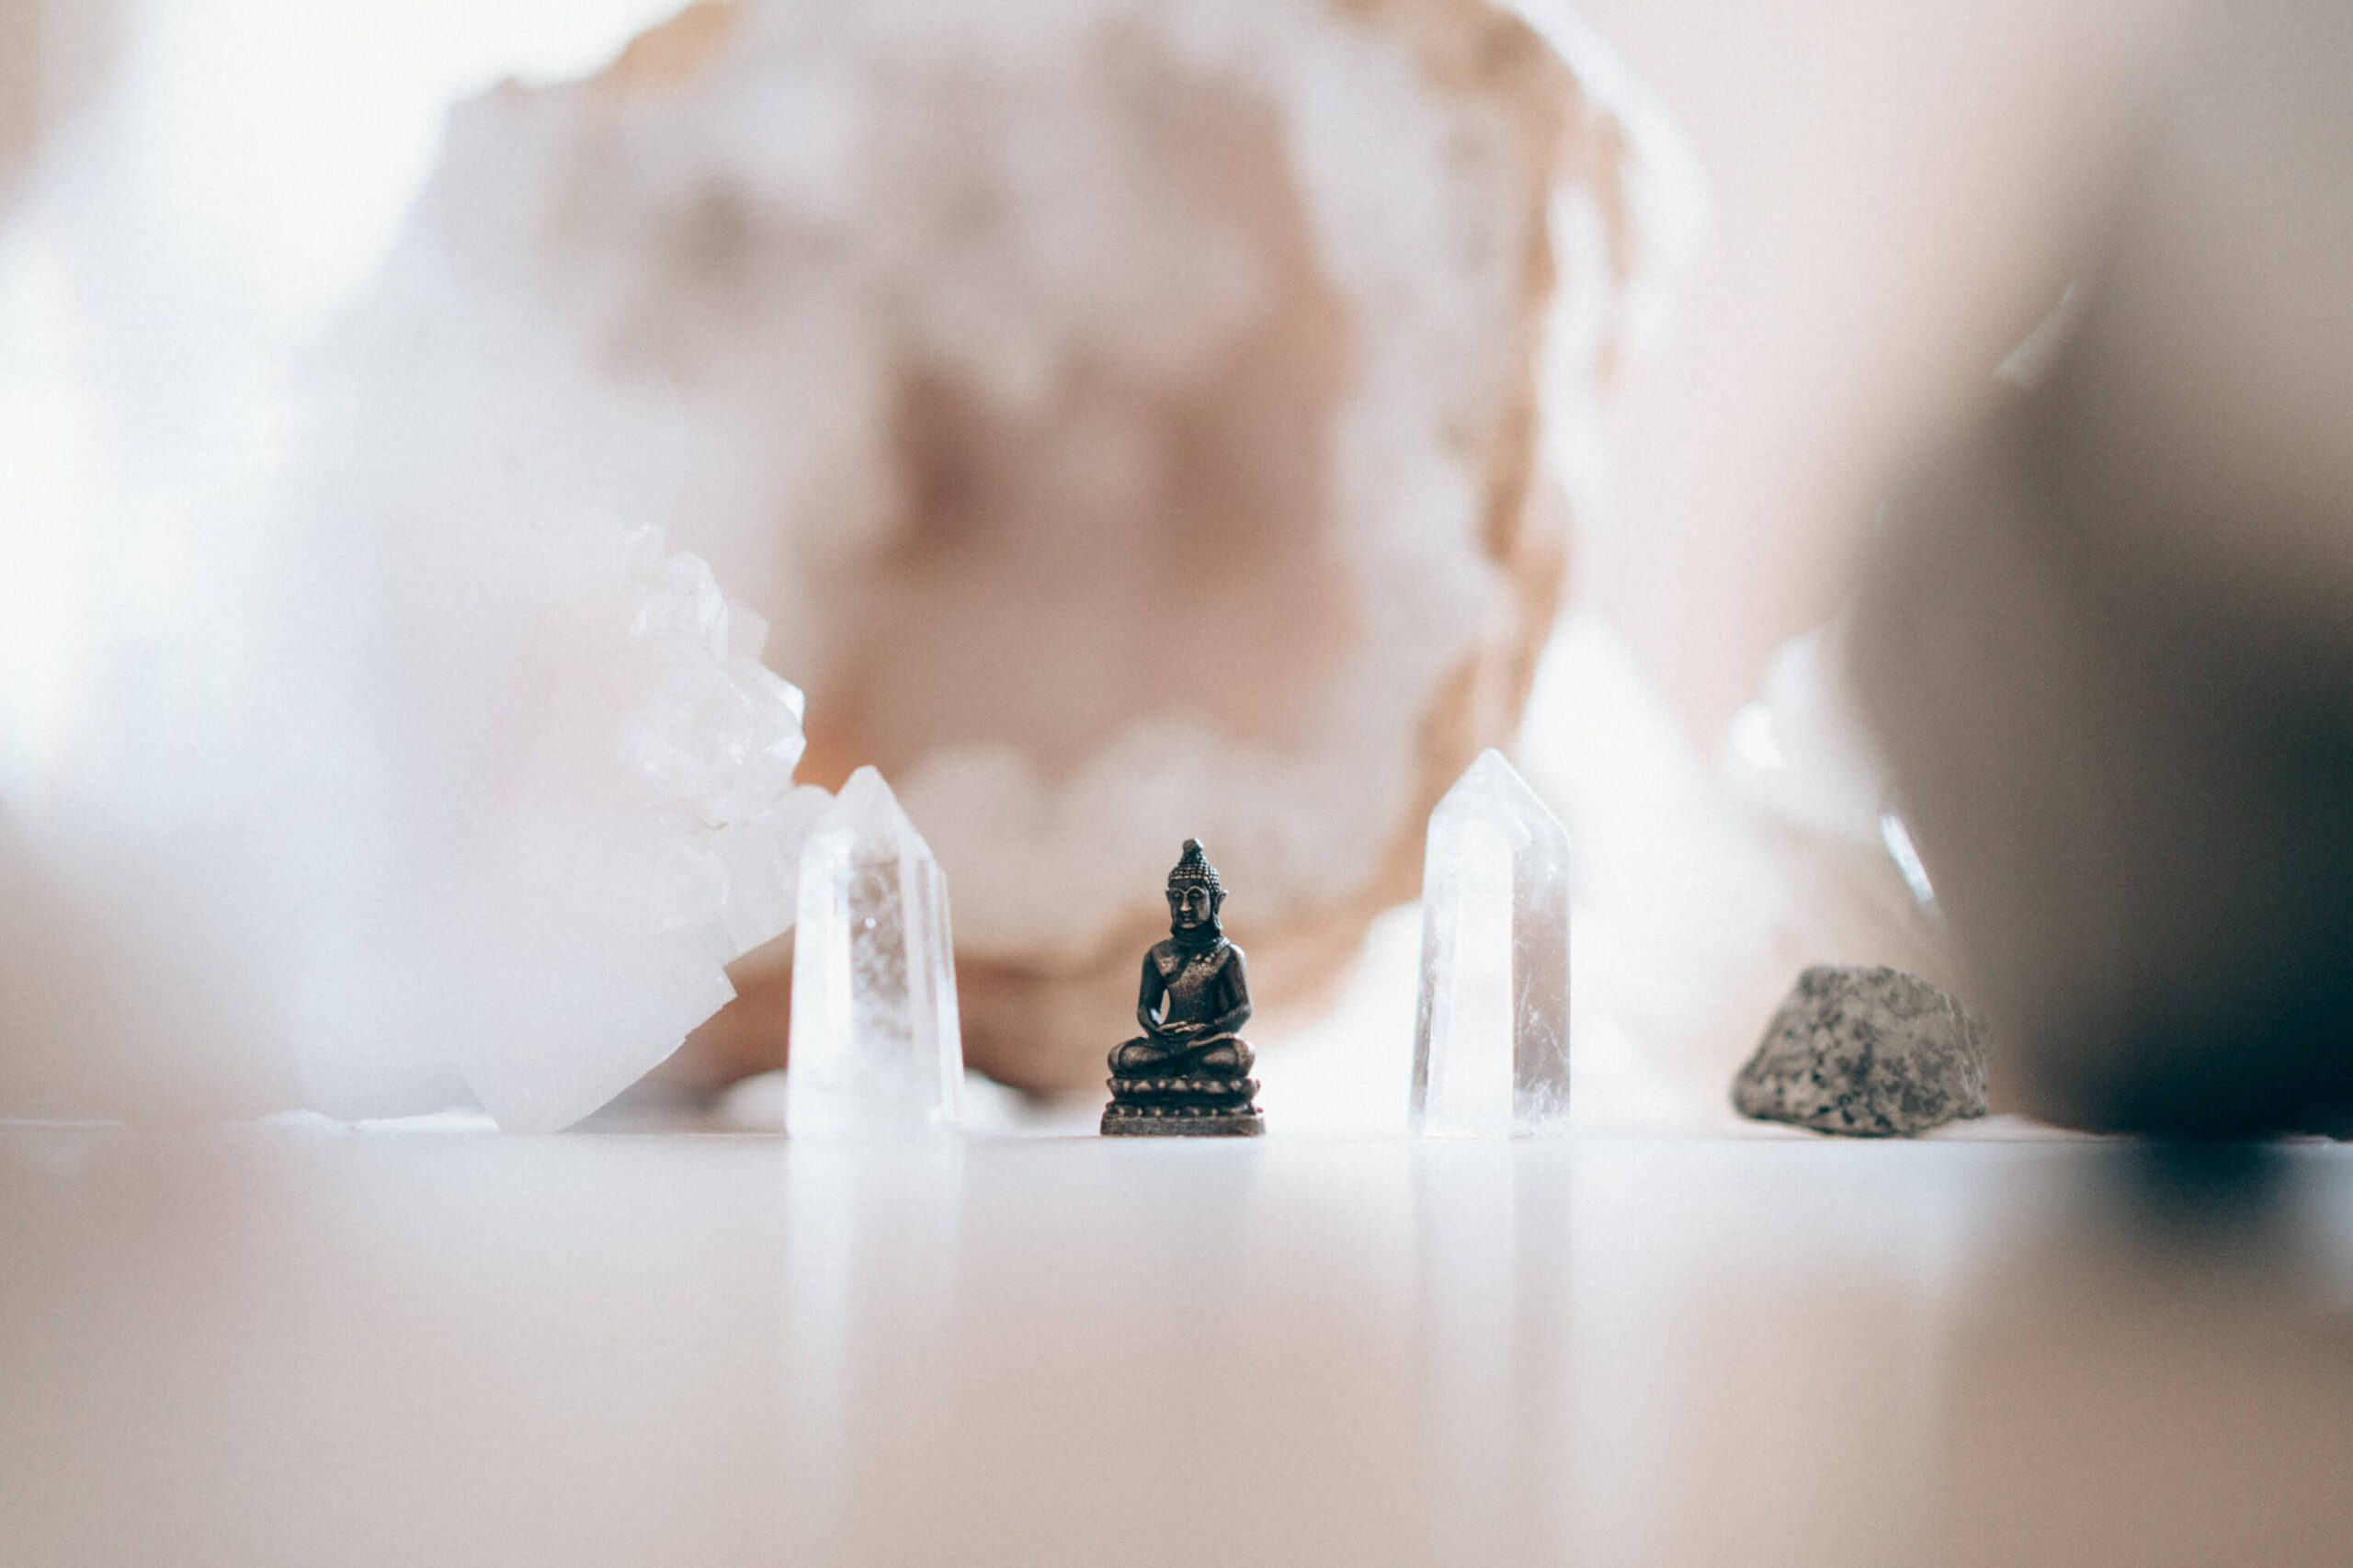 Small buddah and crystals as mindfulness can help in uncertainty